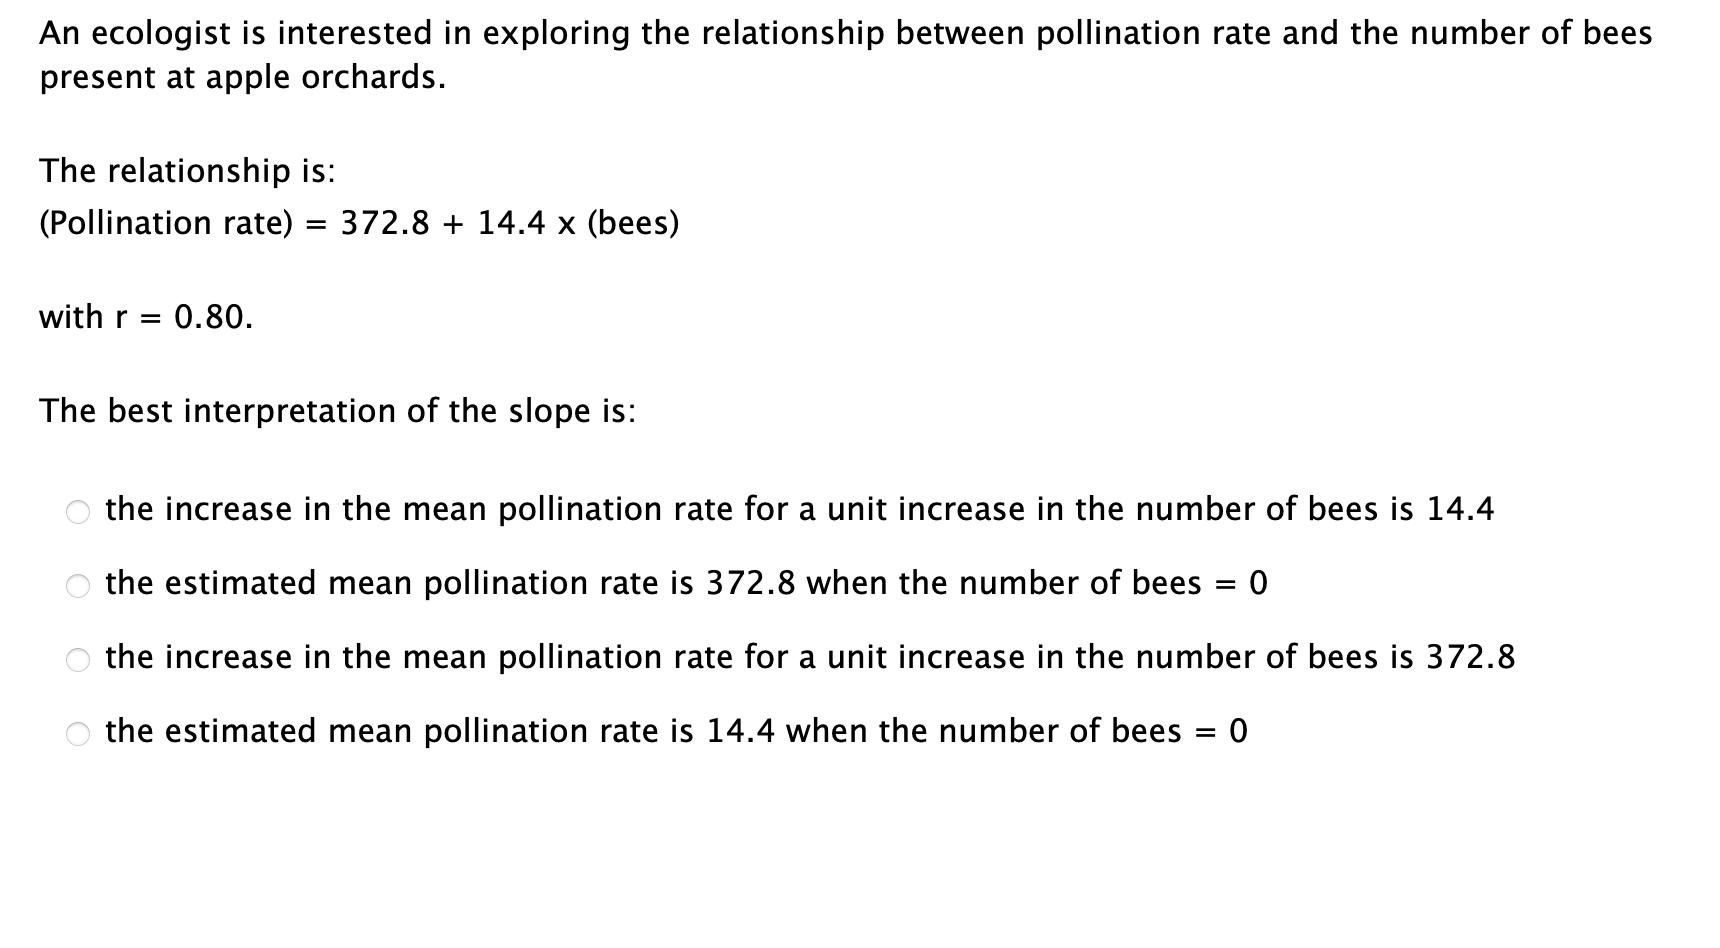 An ecologist is interested in exploring the relationship between pollination rate and the number of bees